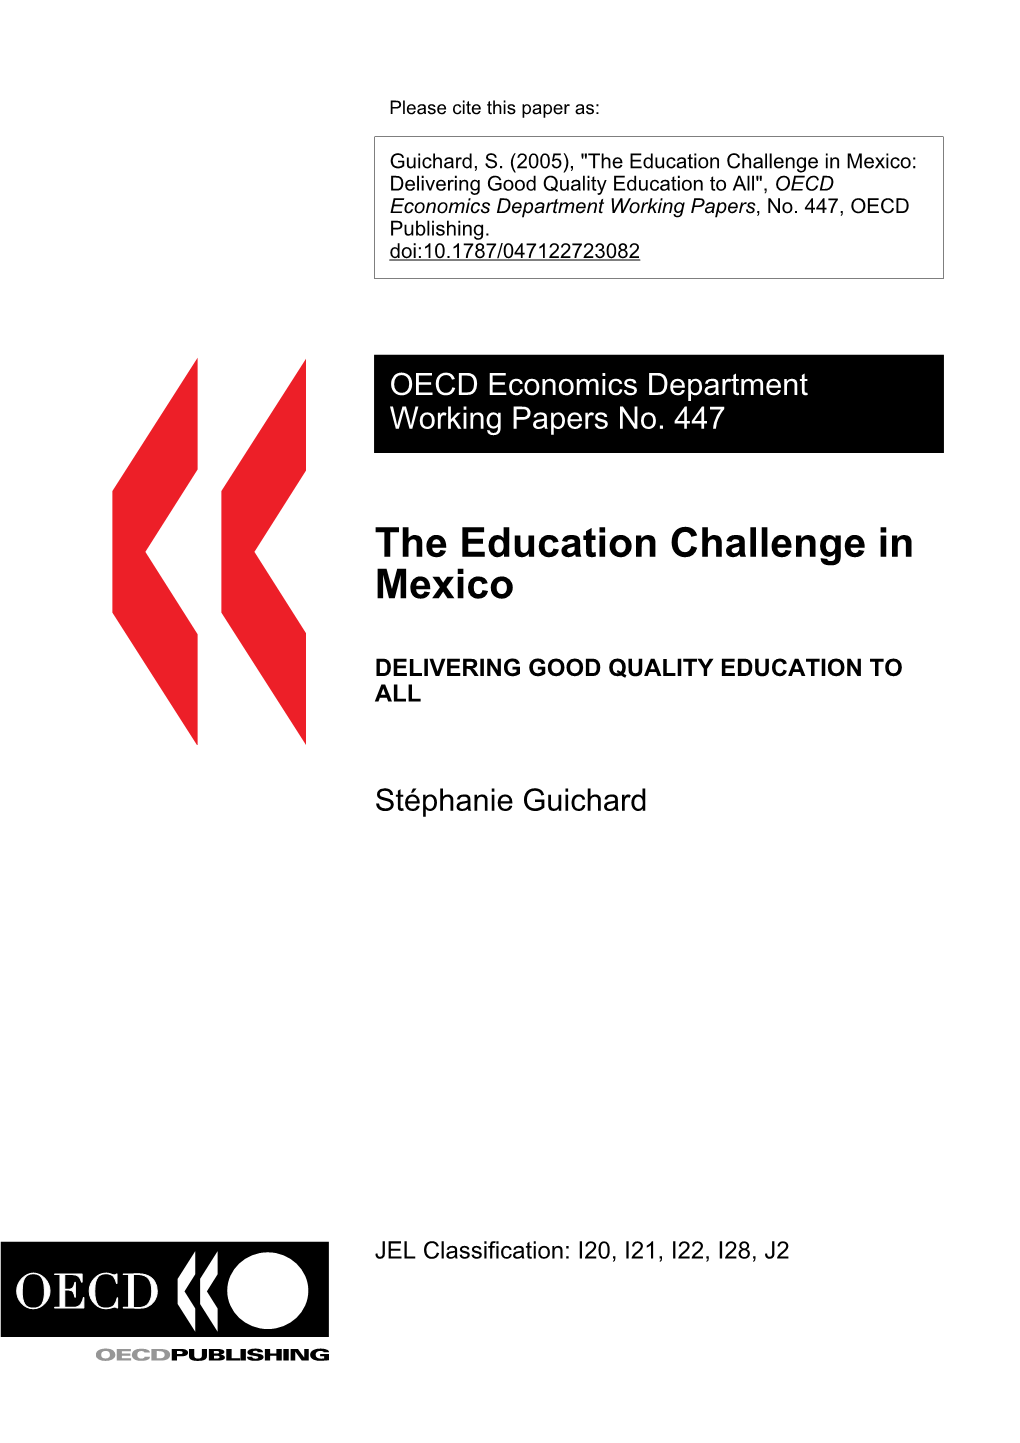 The Education Challenge in Mexico: Delivering Good Quality Education to All", OECD Economics Department Working Papers, No